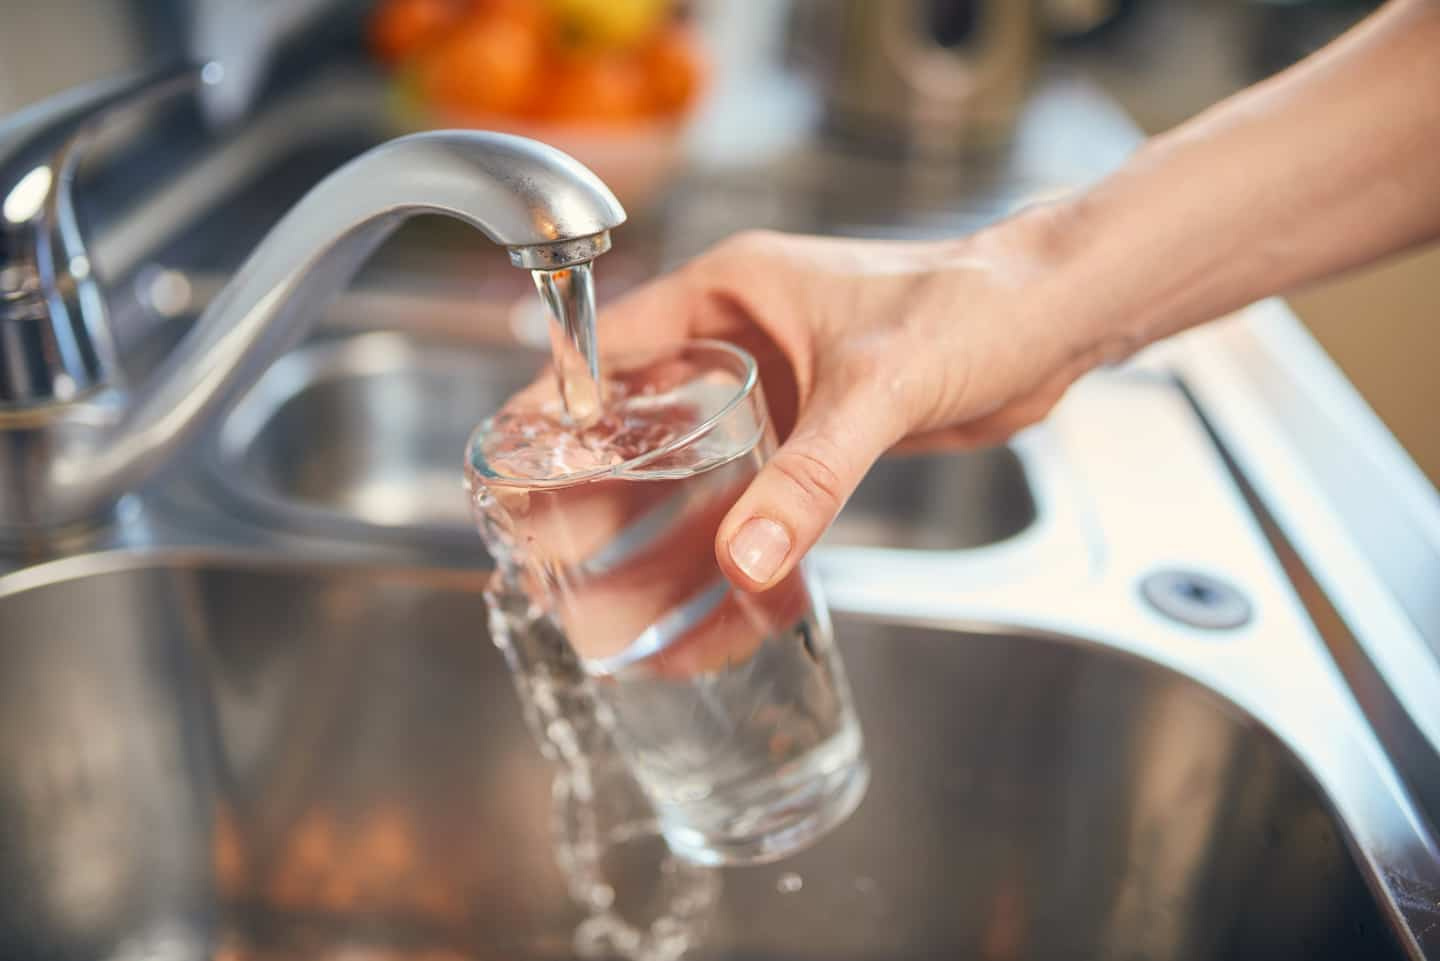 Drinking water every day could slow aging